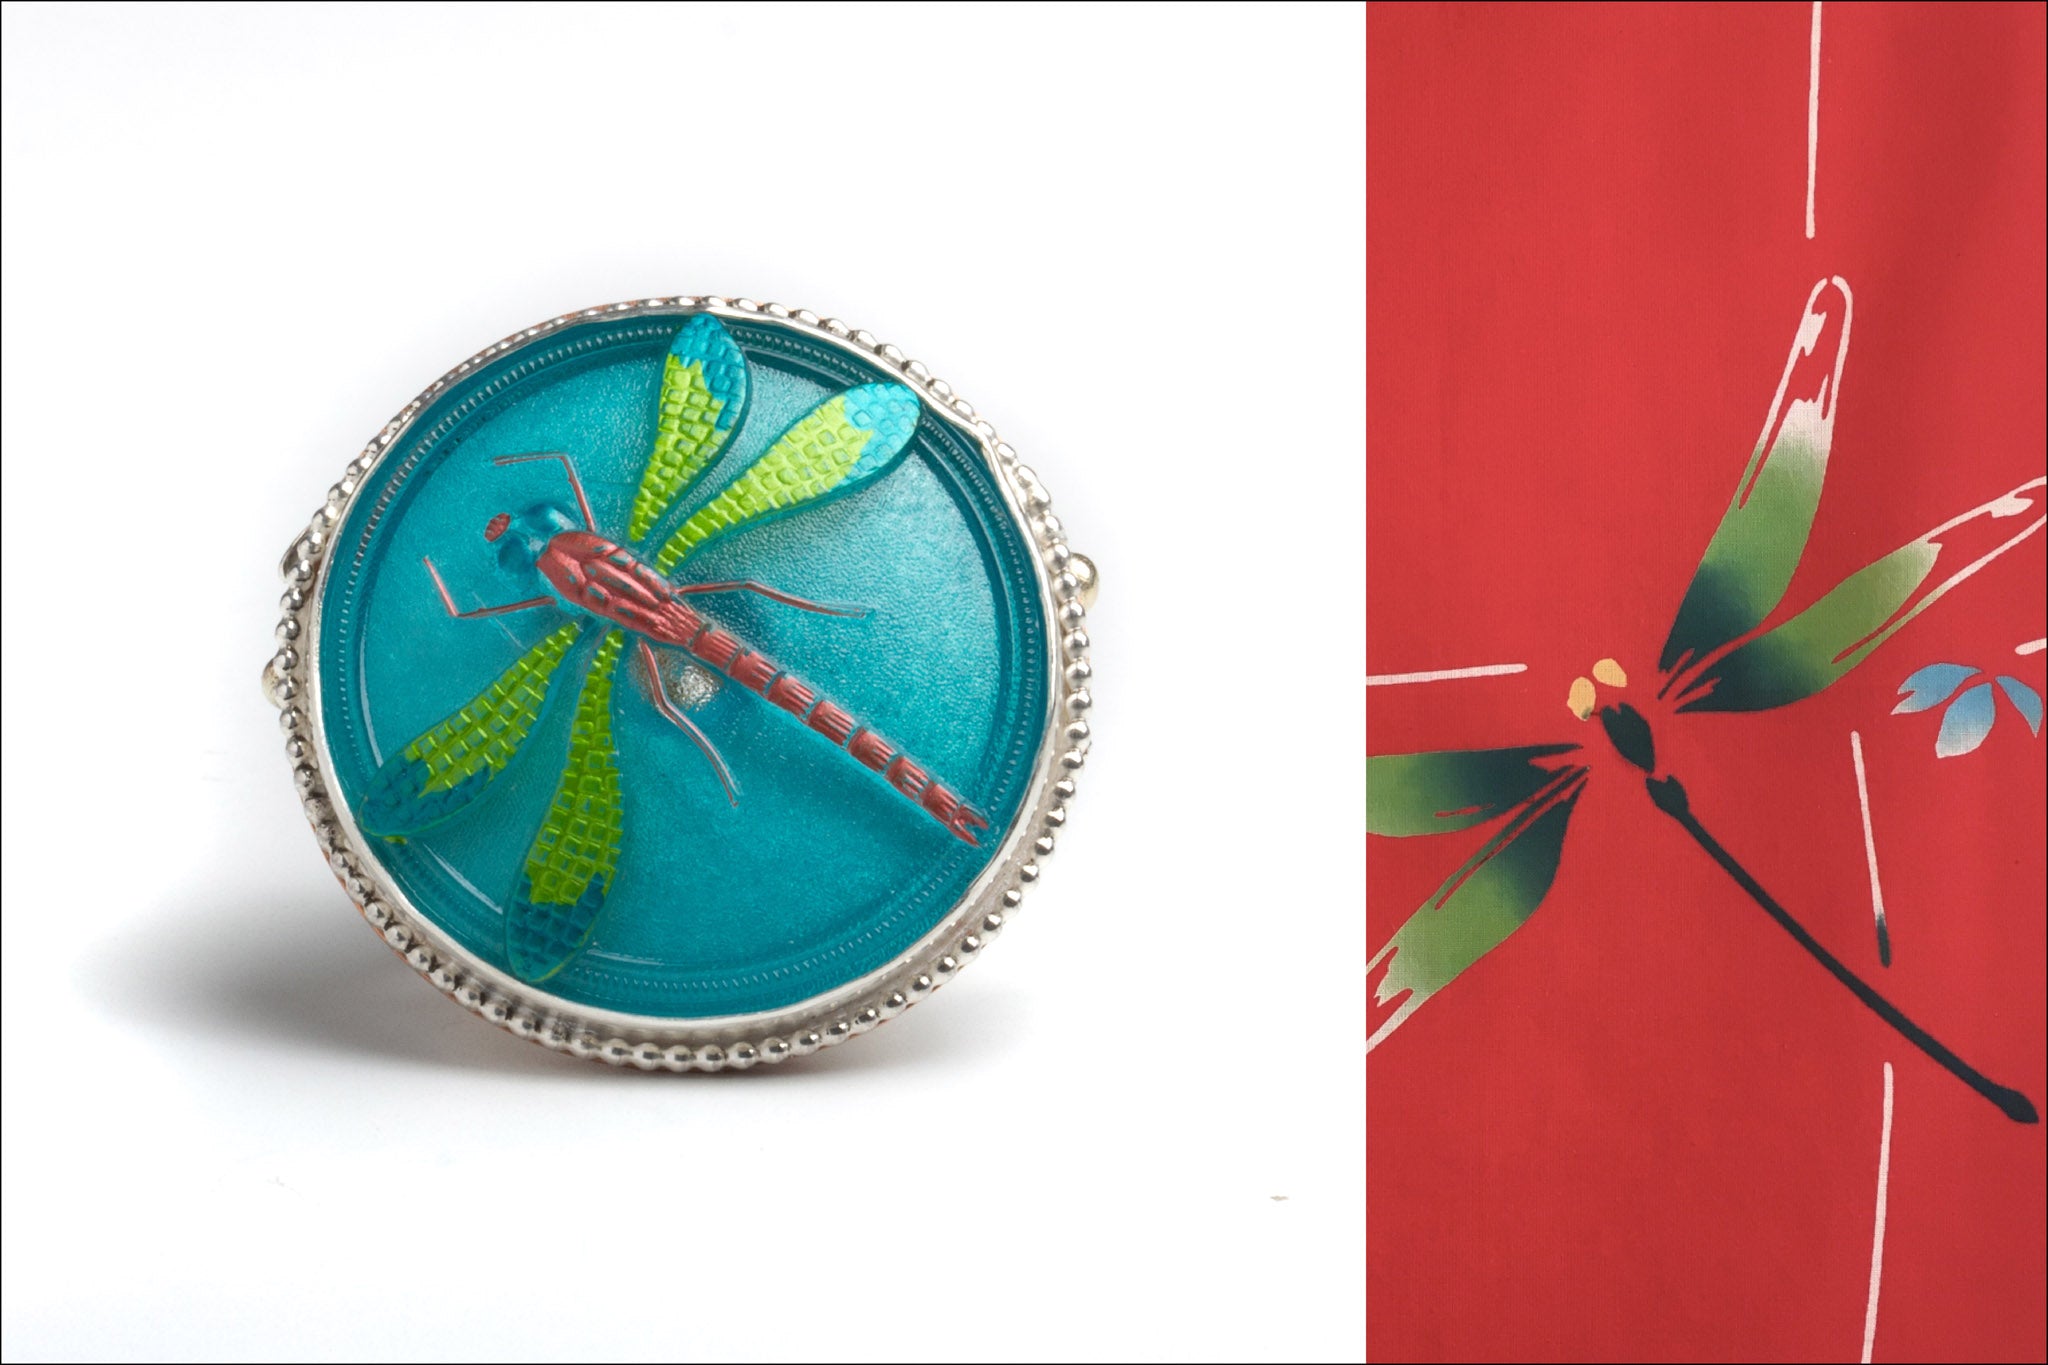 Dragonfly, a ring by Juan Reyes for the Yukata Jewelry Show 2022—a creative collaboration between Okan Arts and Danaca Design